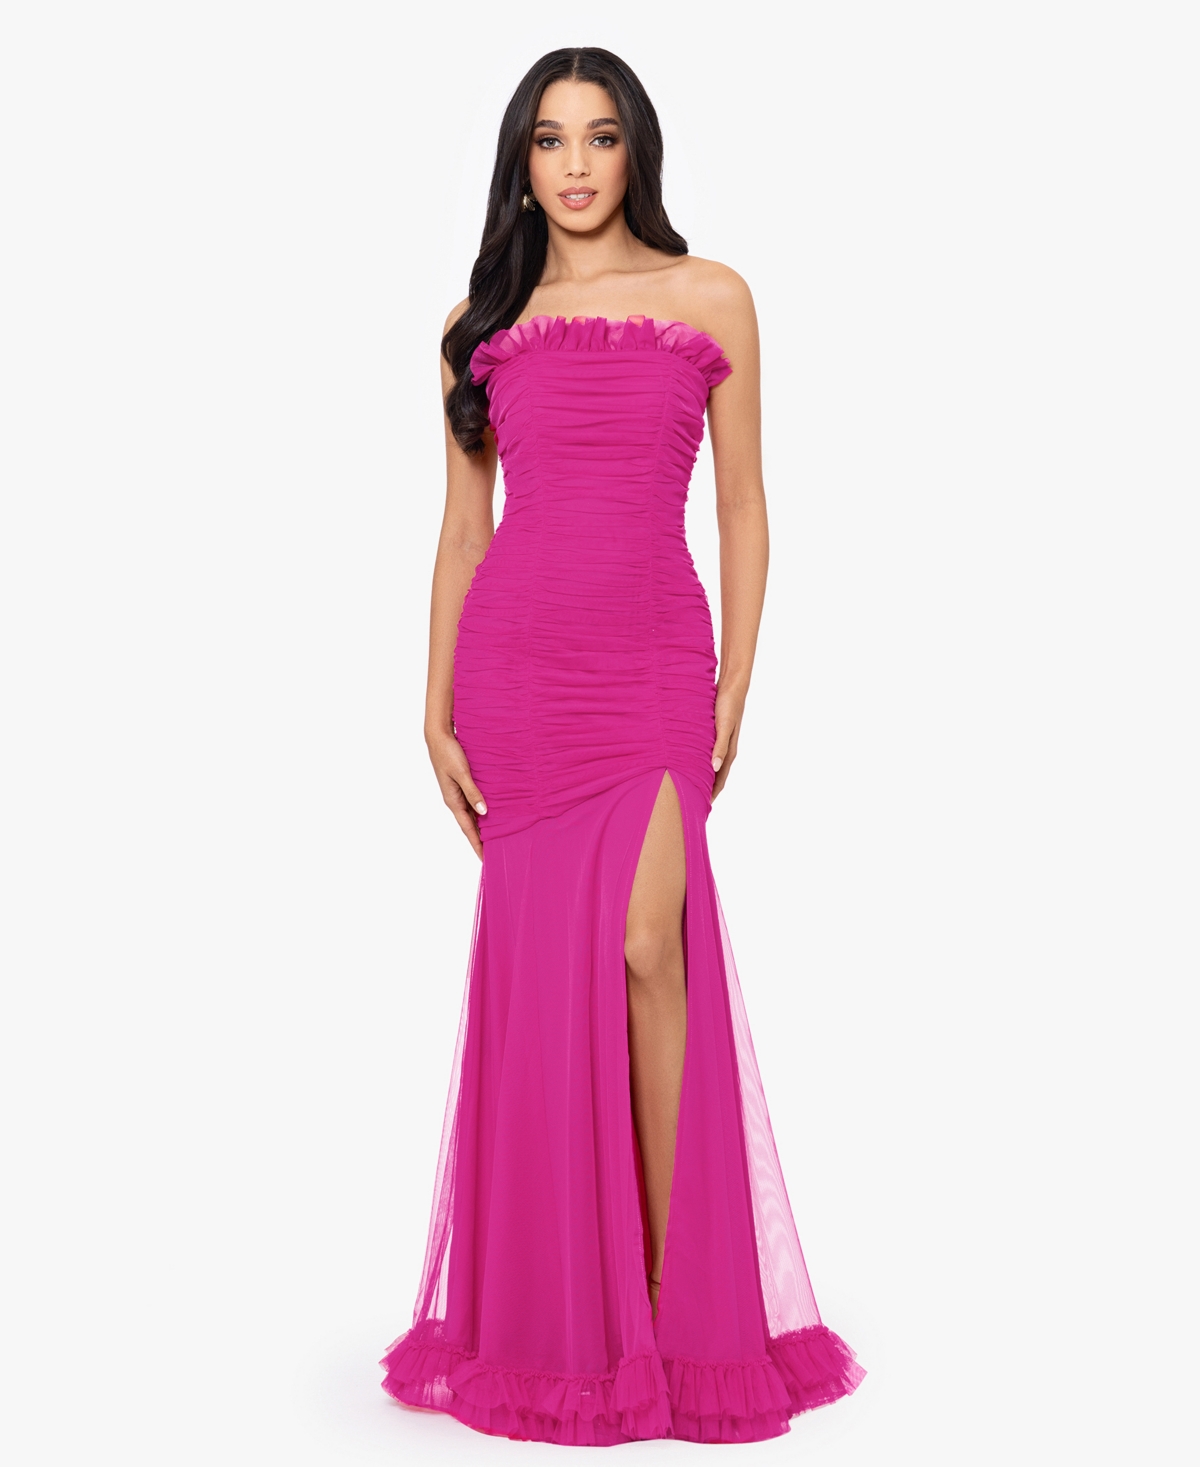 Juniors' Ruffled Ruched Strapless Mesh Gown - Hot Pink